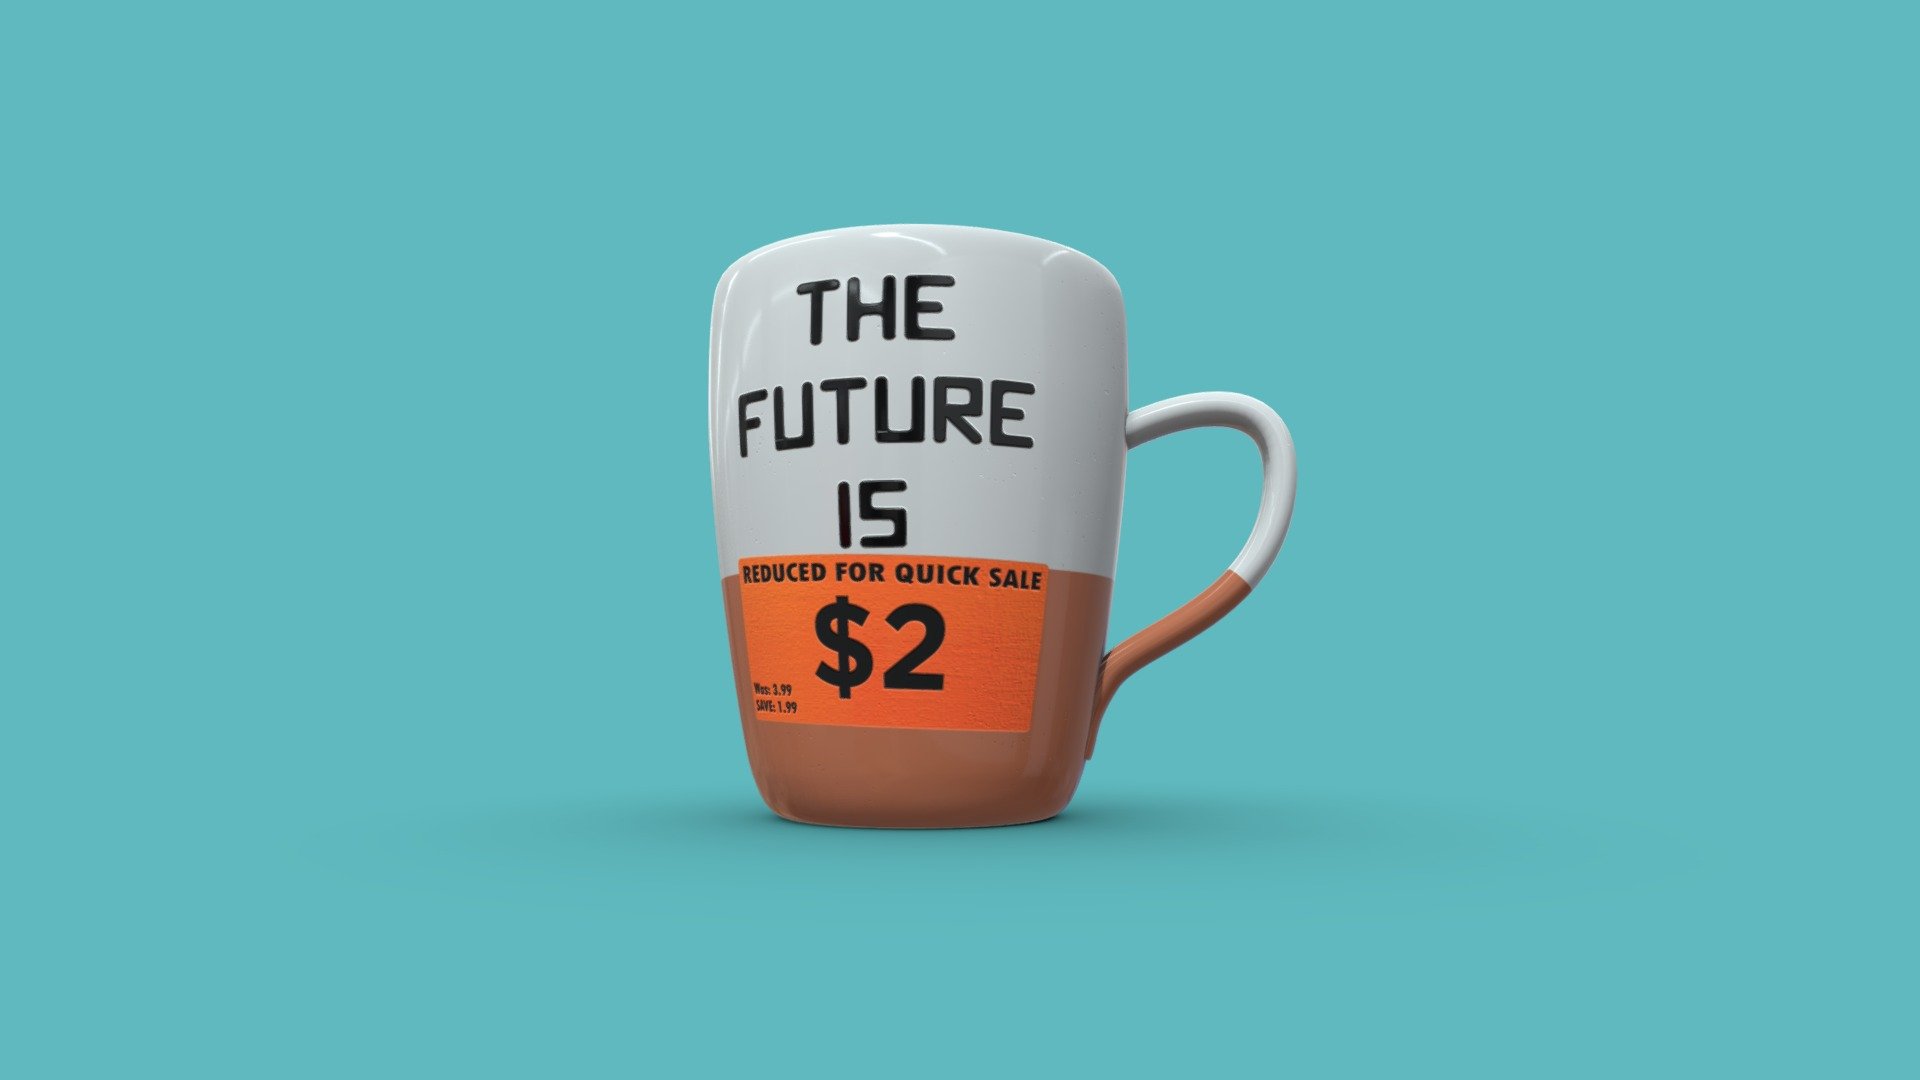 The Future Is [Reduced for Quick Sale]